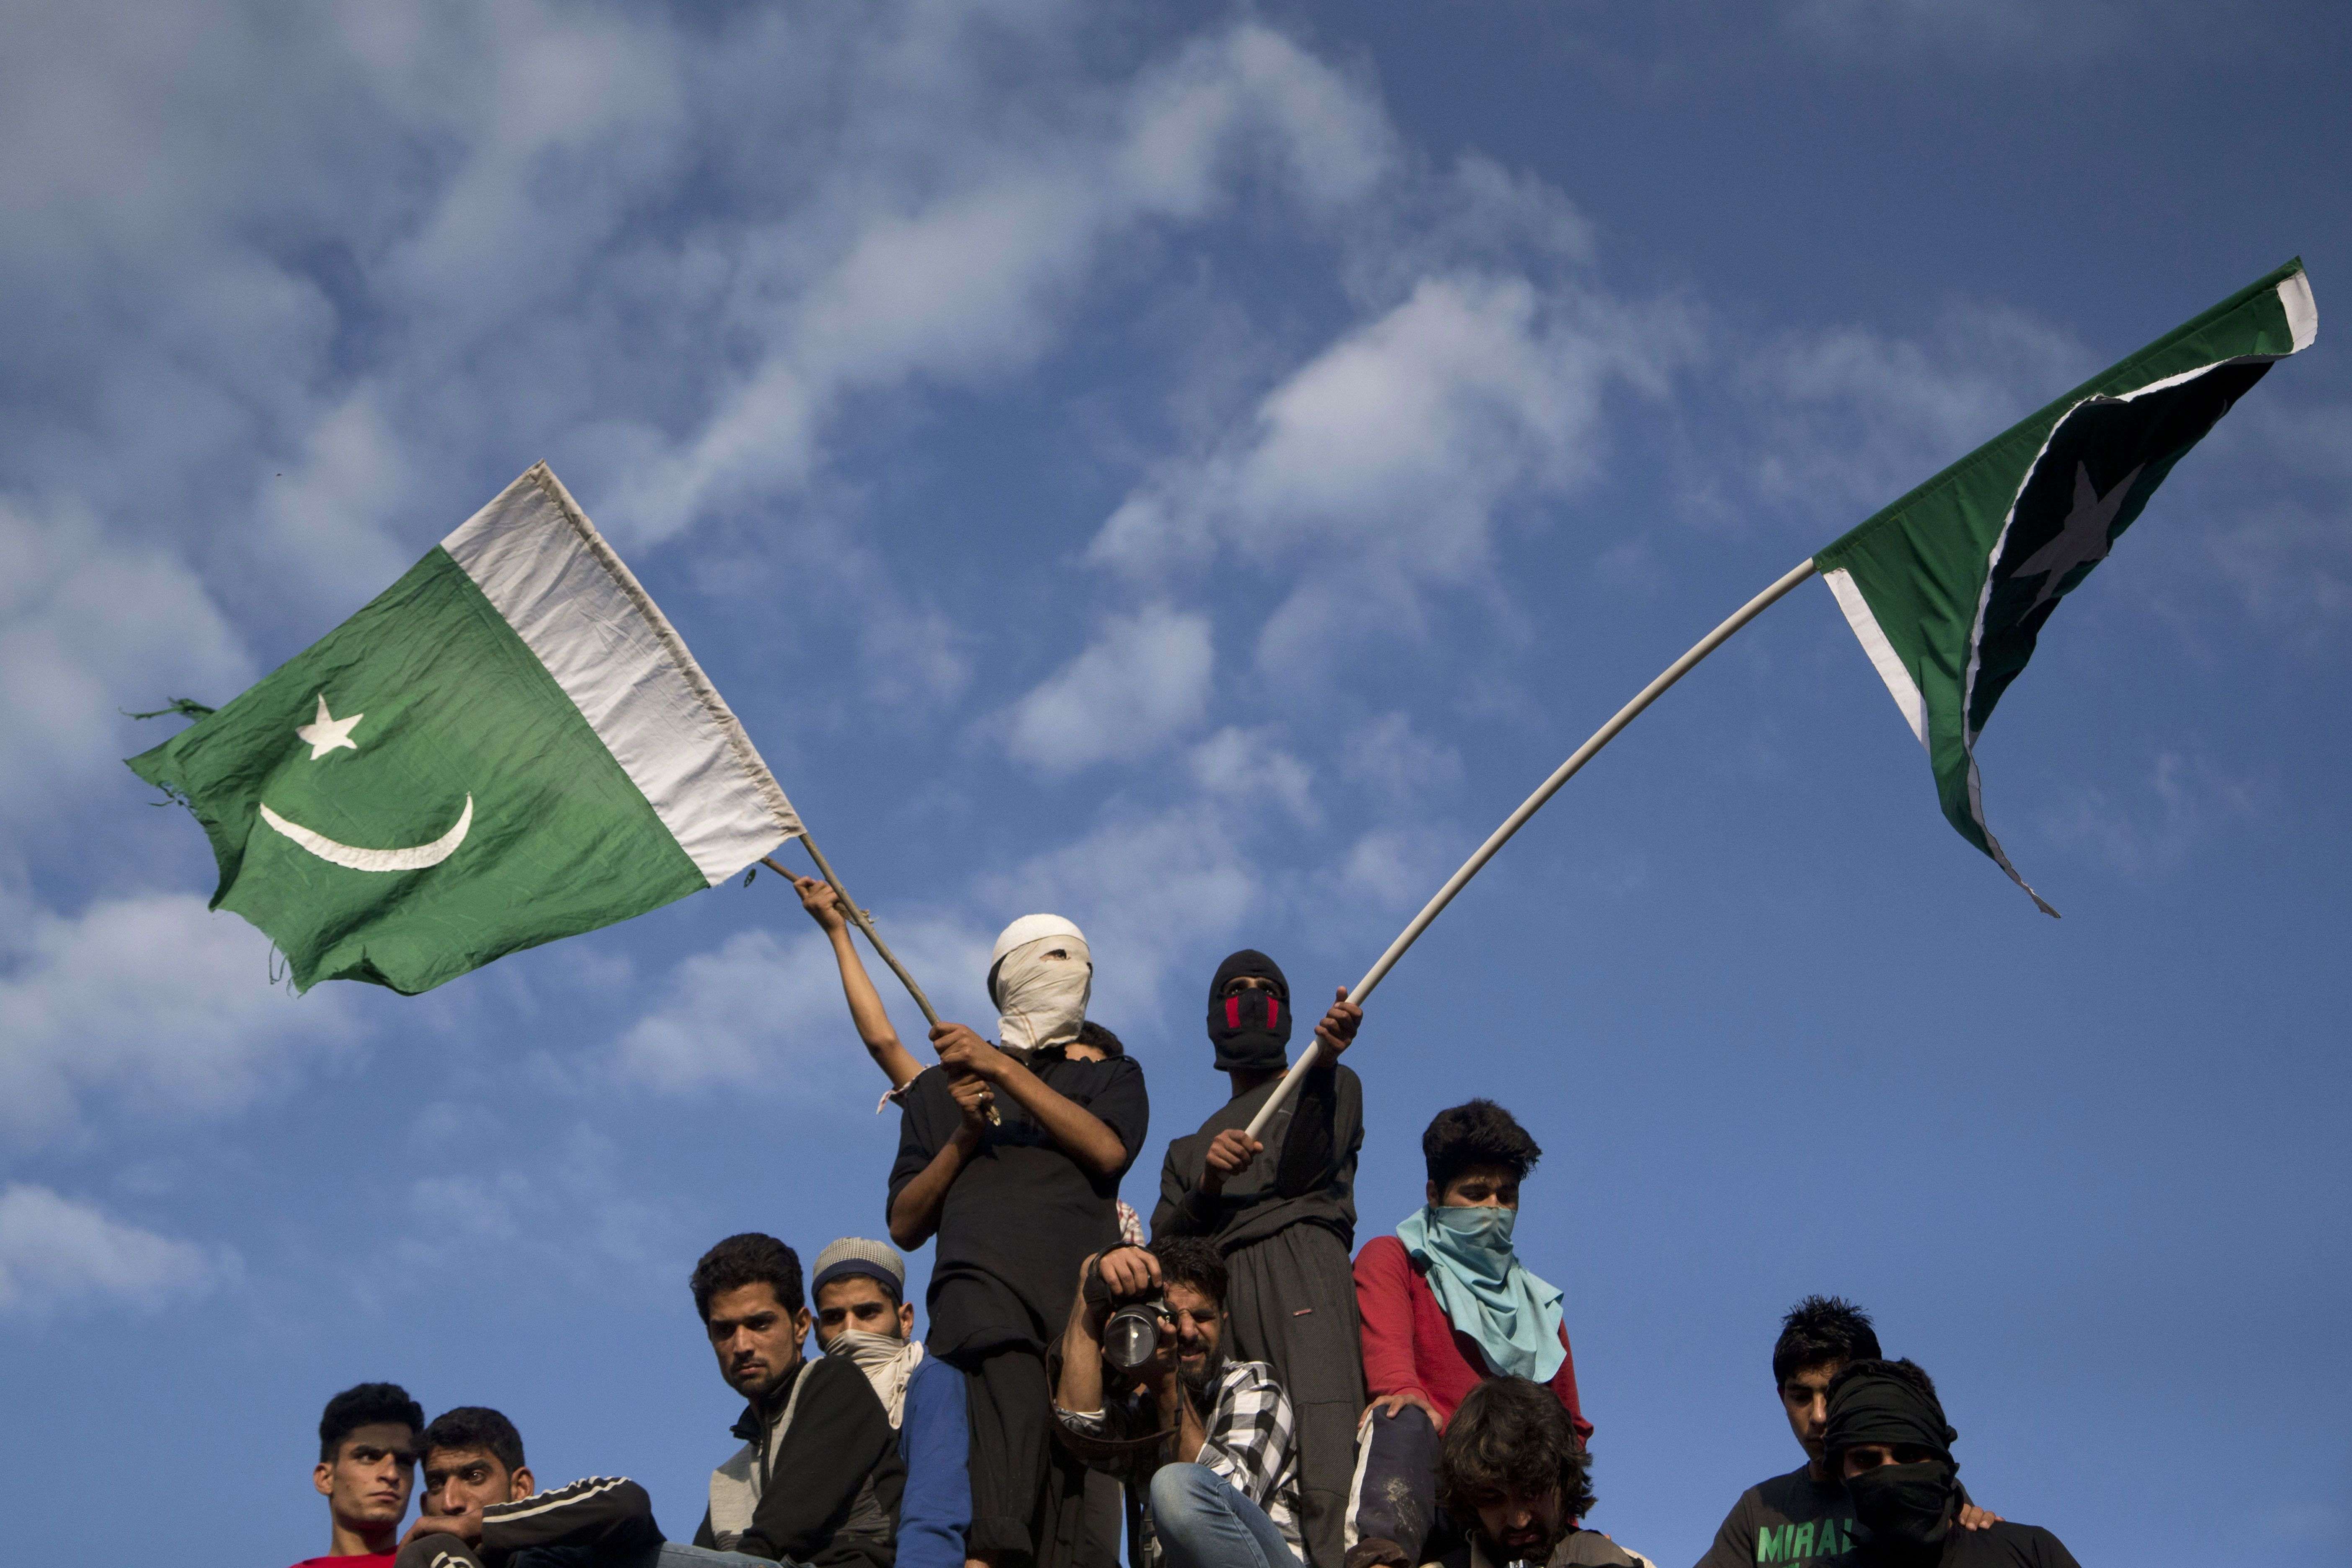 FILE- In this July 9, 2016 file photo, Kashmiri villagers wave Pakistani flags during the funeral procession of Burhan Wani, chief of operations of Indian Kashmir's largest rebel group Hizbul Mujahideen, in Tral, some 38 Kilometers (24 miles) south of Srinagar, Indian controlled Kashmir. When Indian forces gleefully announced last week that they had killed a top Kashmiri rebel leader, they called it a major victory in the fight against militants in the disputed Himalayan region. They clearly didn’t expect the backlash that followed - an outpouring of public anger, daily protests and dozens dead in the streets. (AP Photo/Dar Yasin, File)